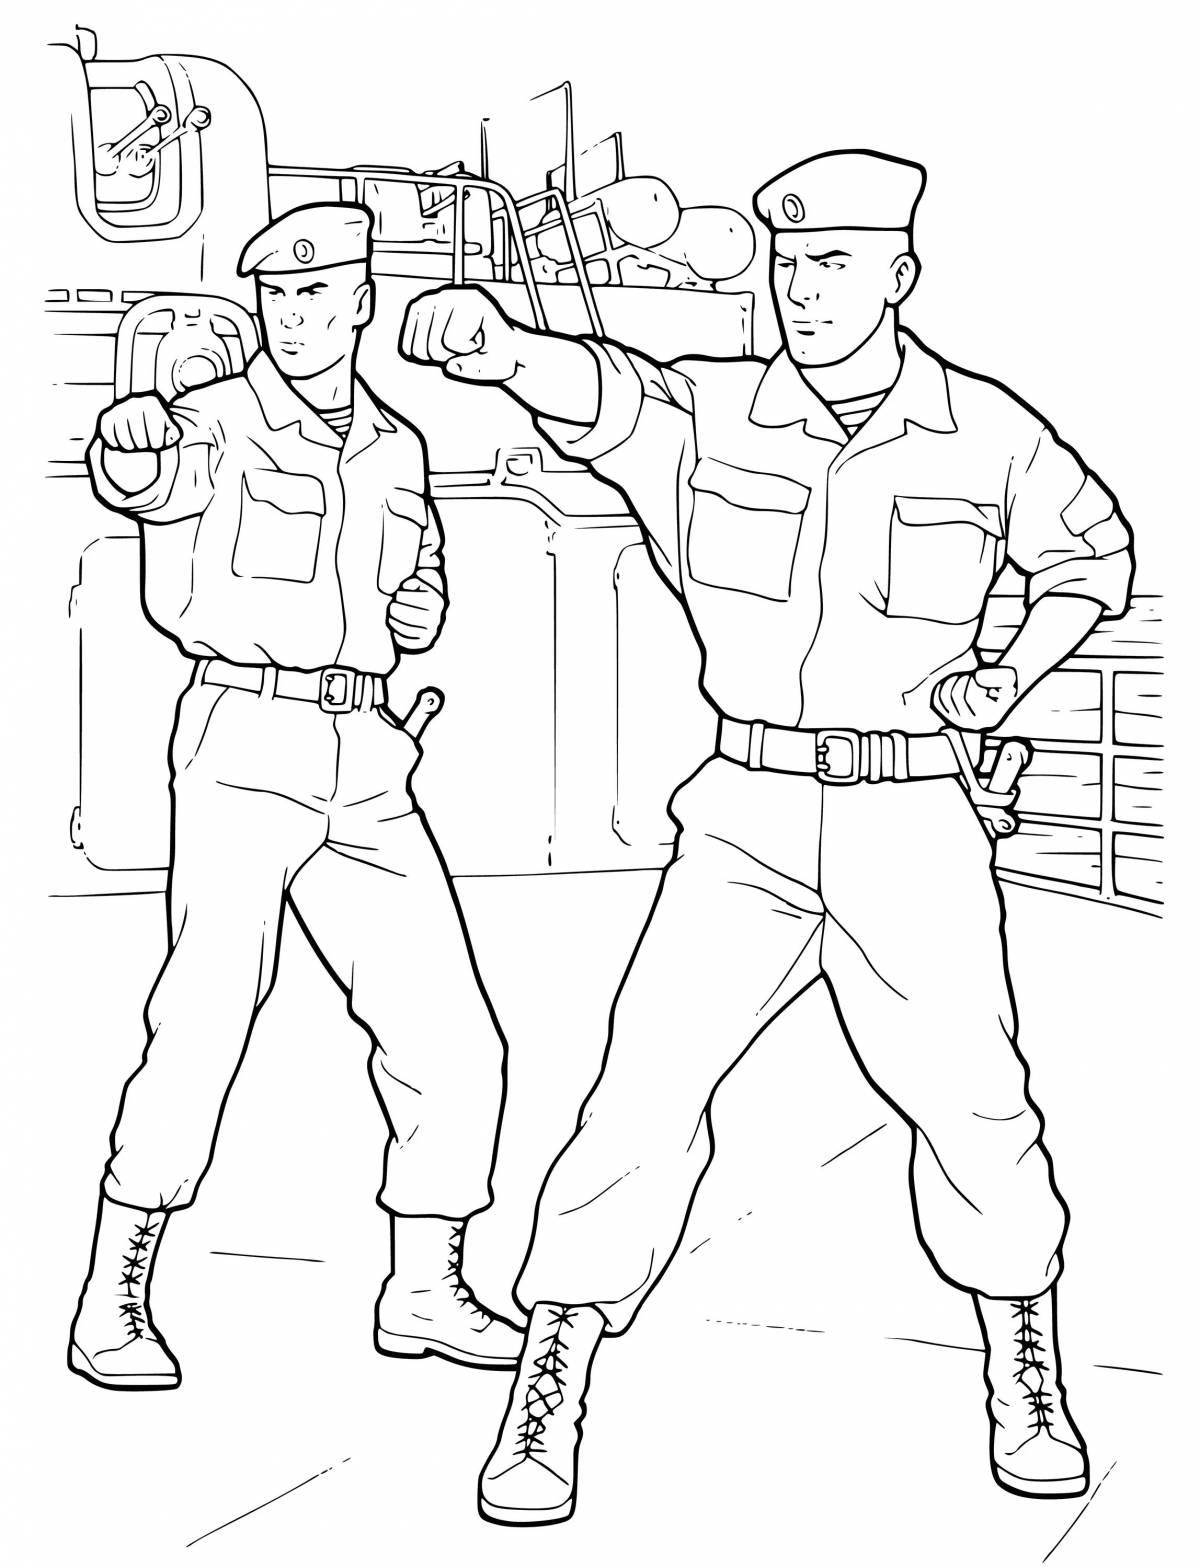 Attractive Russian soldier coloring pages for kids